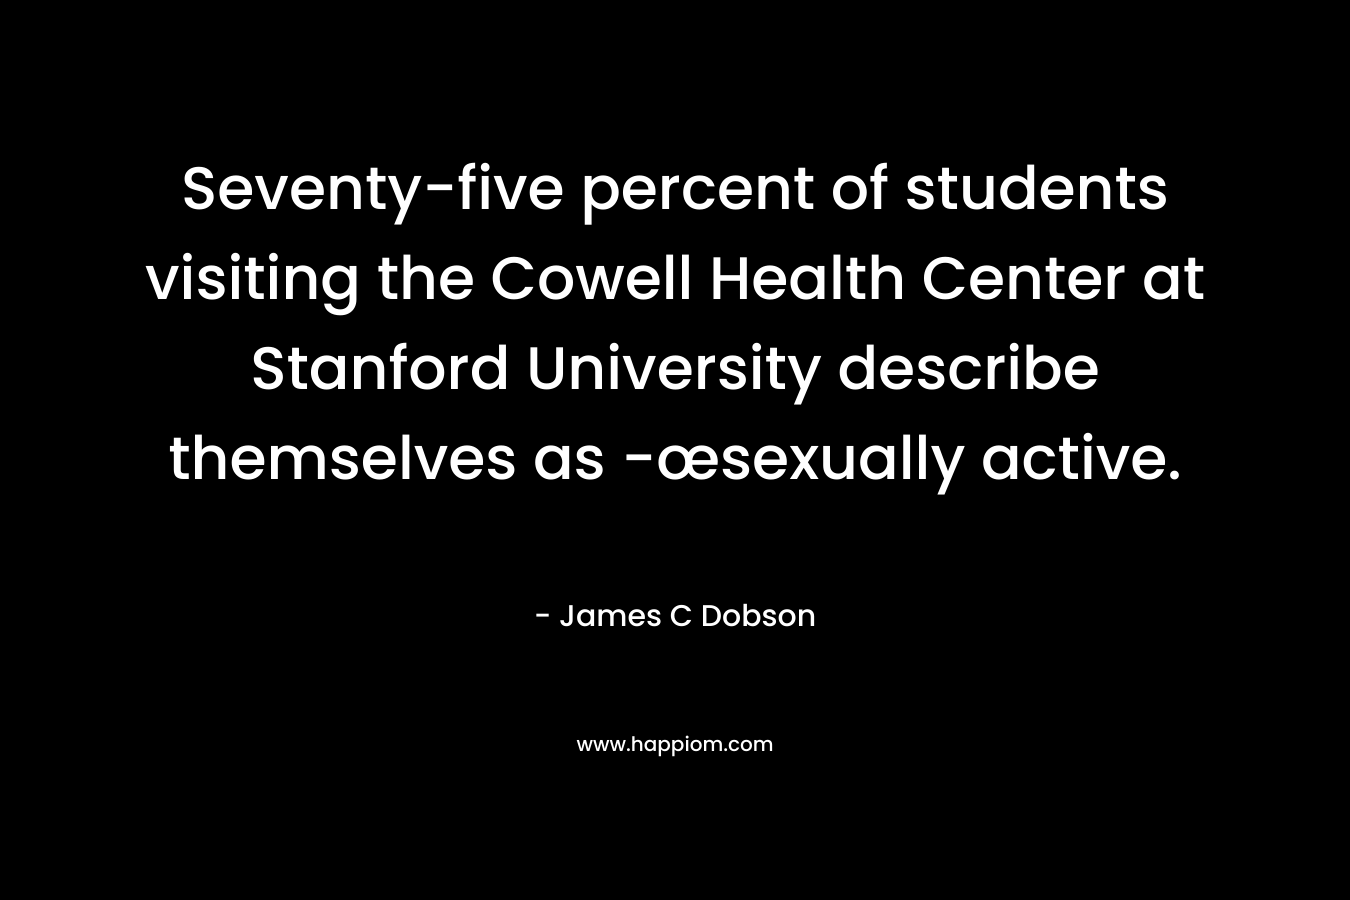 Seventy-five percent of students visiting the Cowell Health Center at Stanford University describe themselves as -œsexually active.